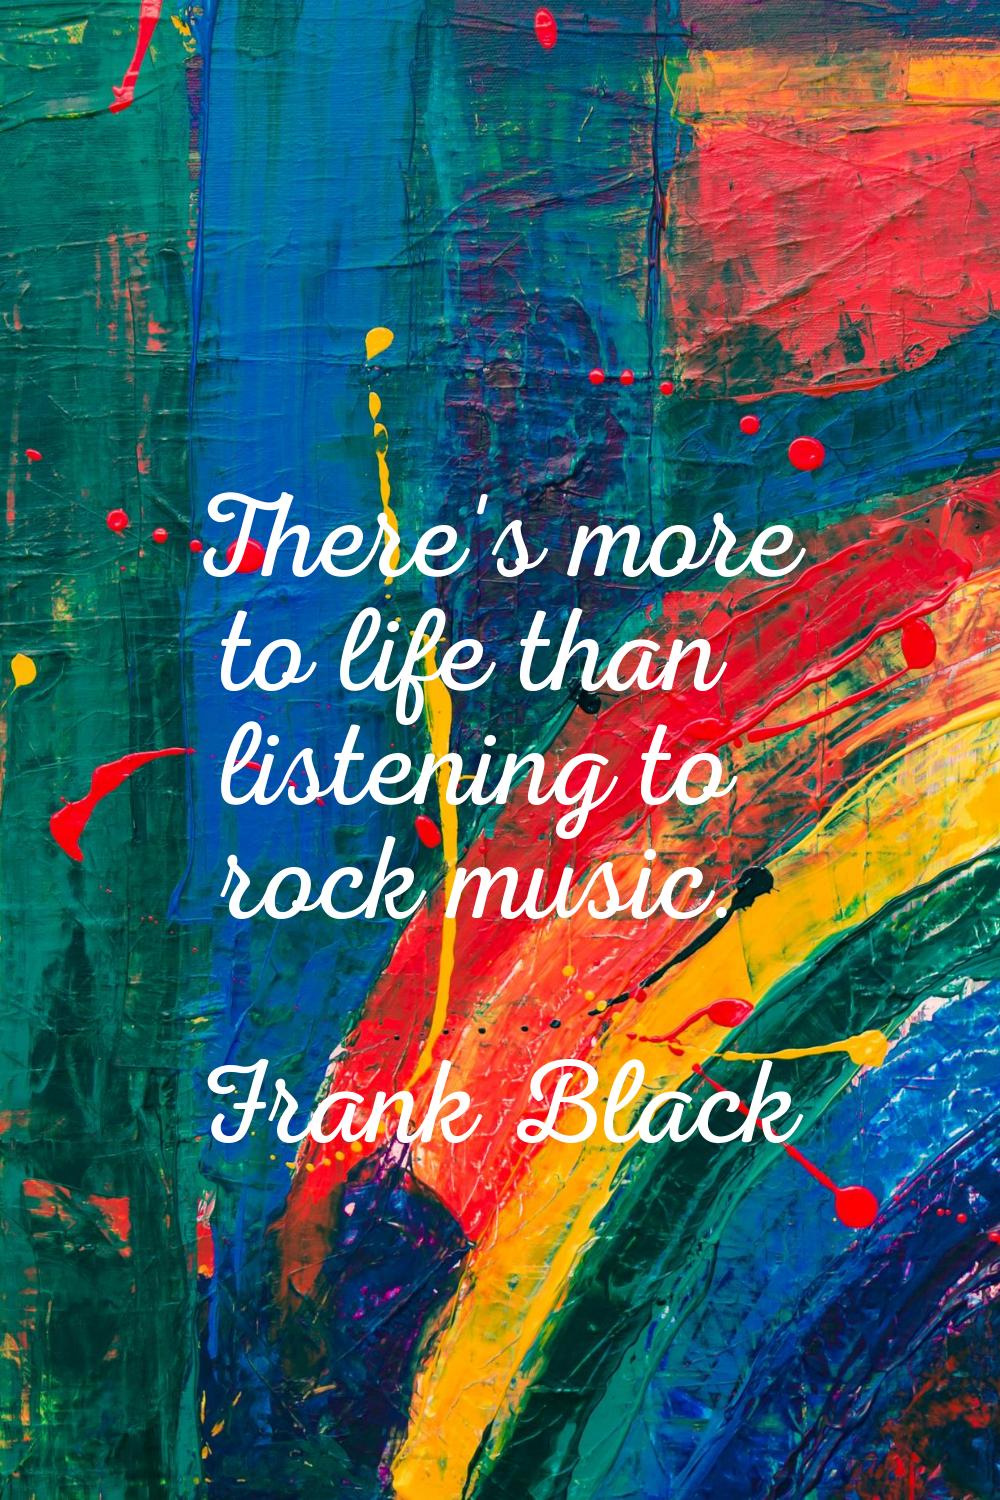 There's more to life than listening to rock music.